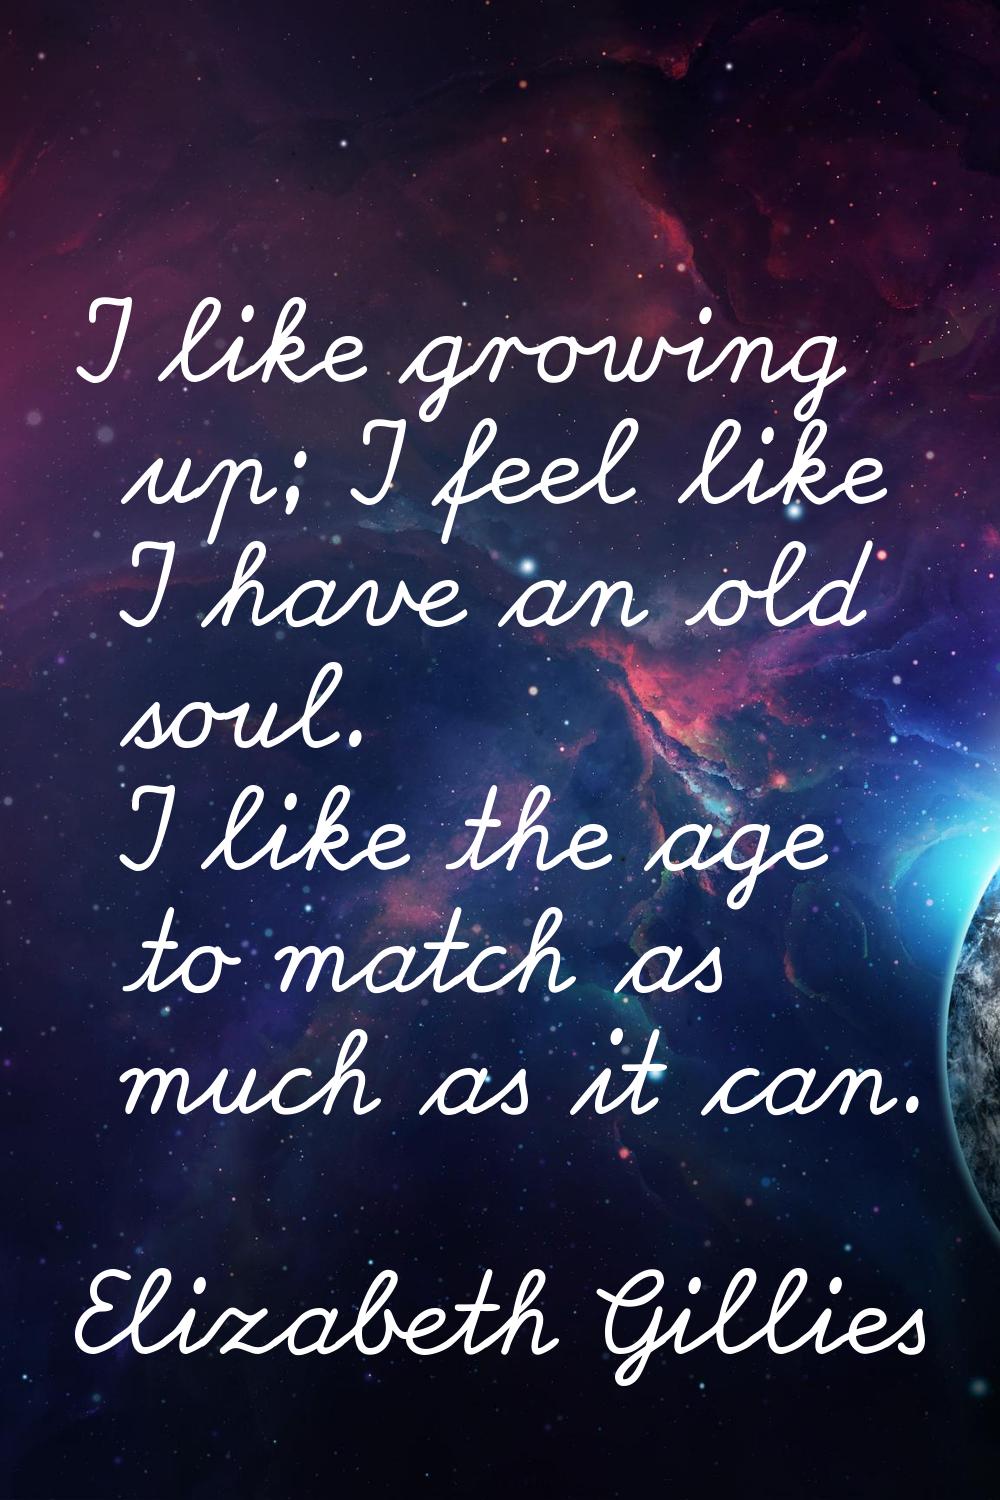 I like growing up; I feel like I have an old soul. I like the age to match as much as it can.